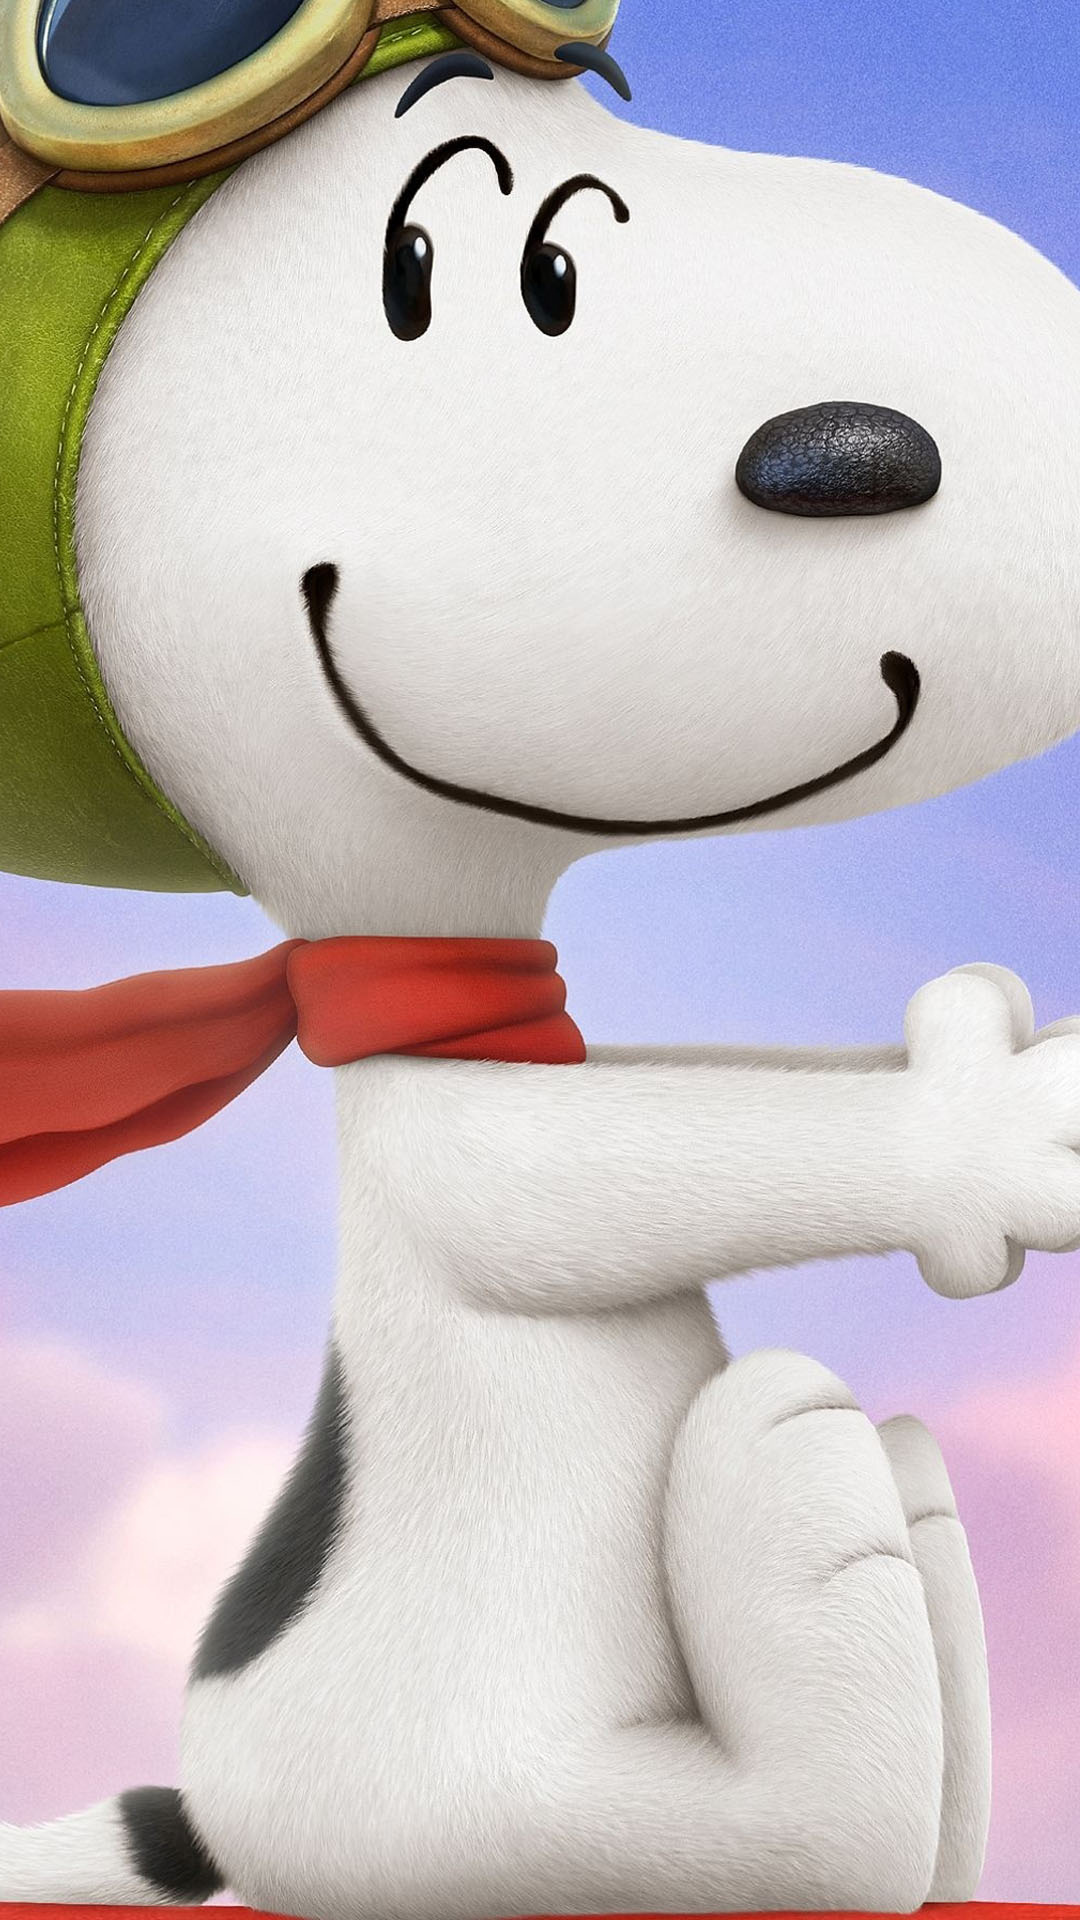 Peanuts Snoopy iPhone 6 6 Plus and iPhone 54 Wallpapers 1080x1920